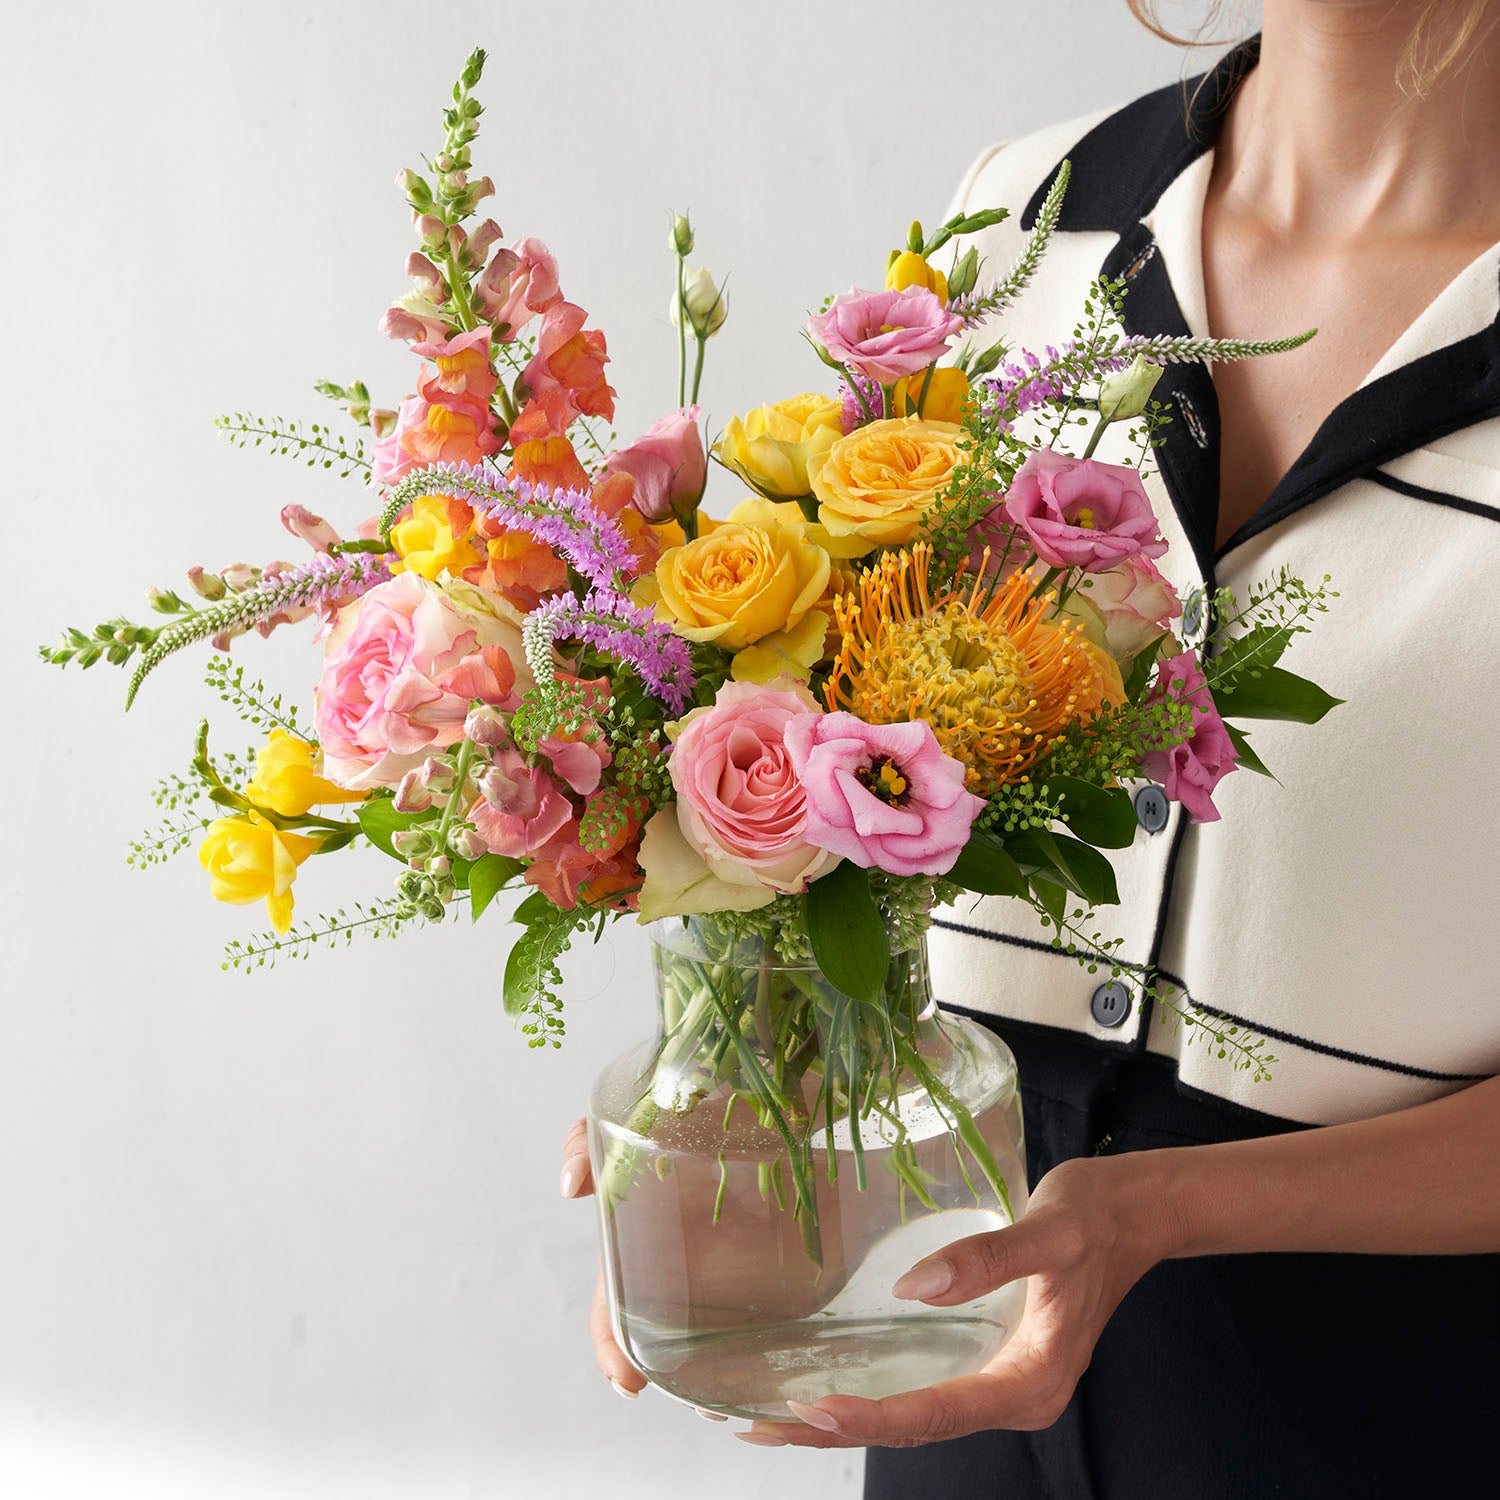 Woman in black and dress holding glass vase full of yellow, pink and oange flowers. 